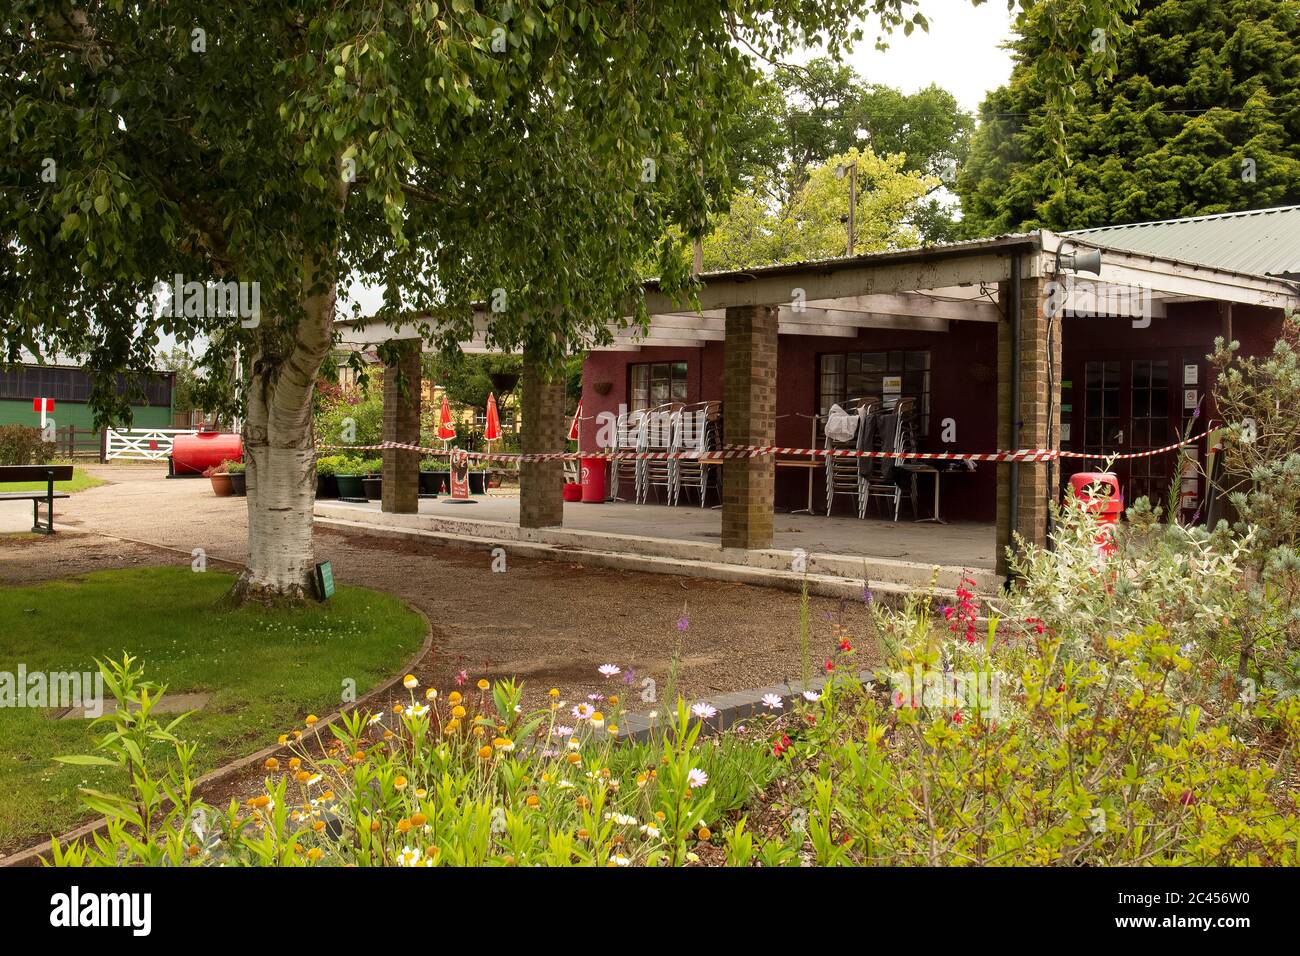 Re-opening of Bressingham Gardens with Covid-19 lockdown restrictions closes cafe but picnics allowed. Bressingham, Diss, Norfolk, UK - June 19th 2020 Stock Photo